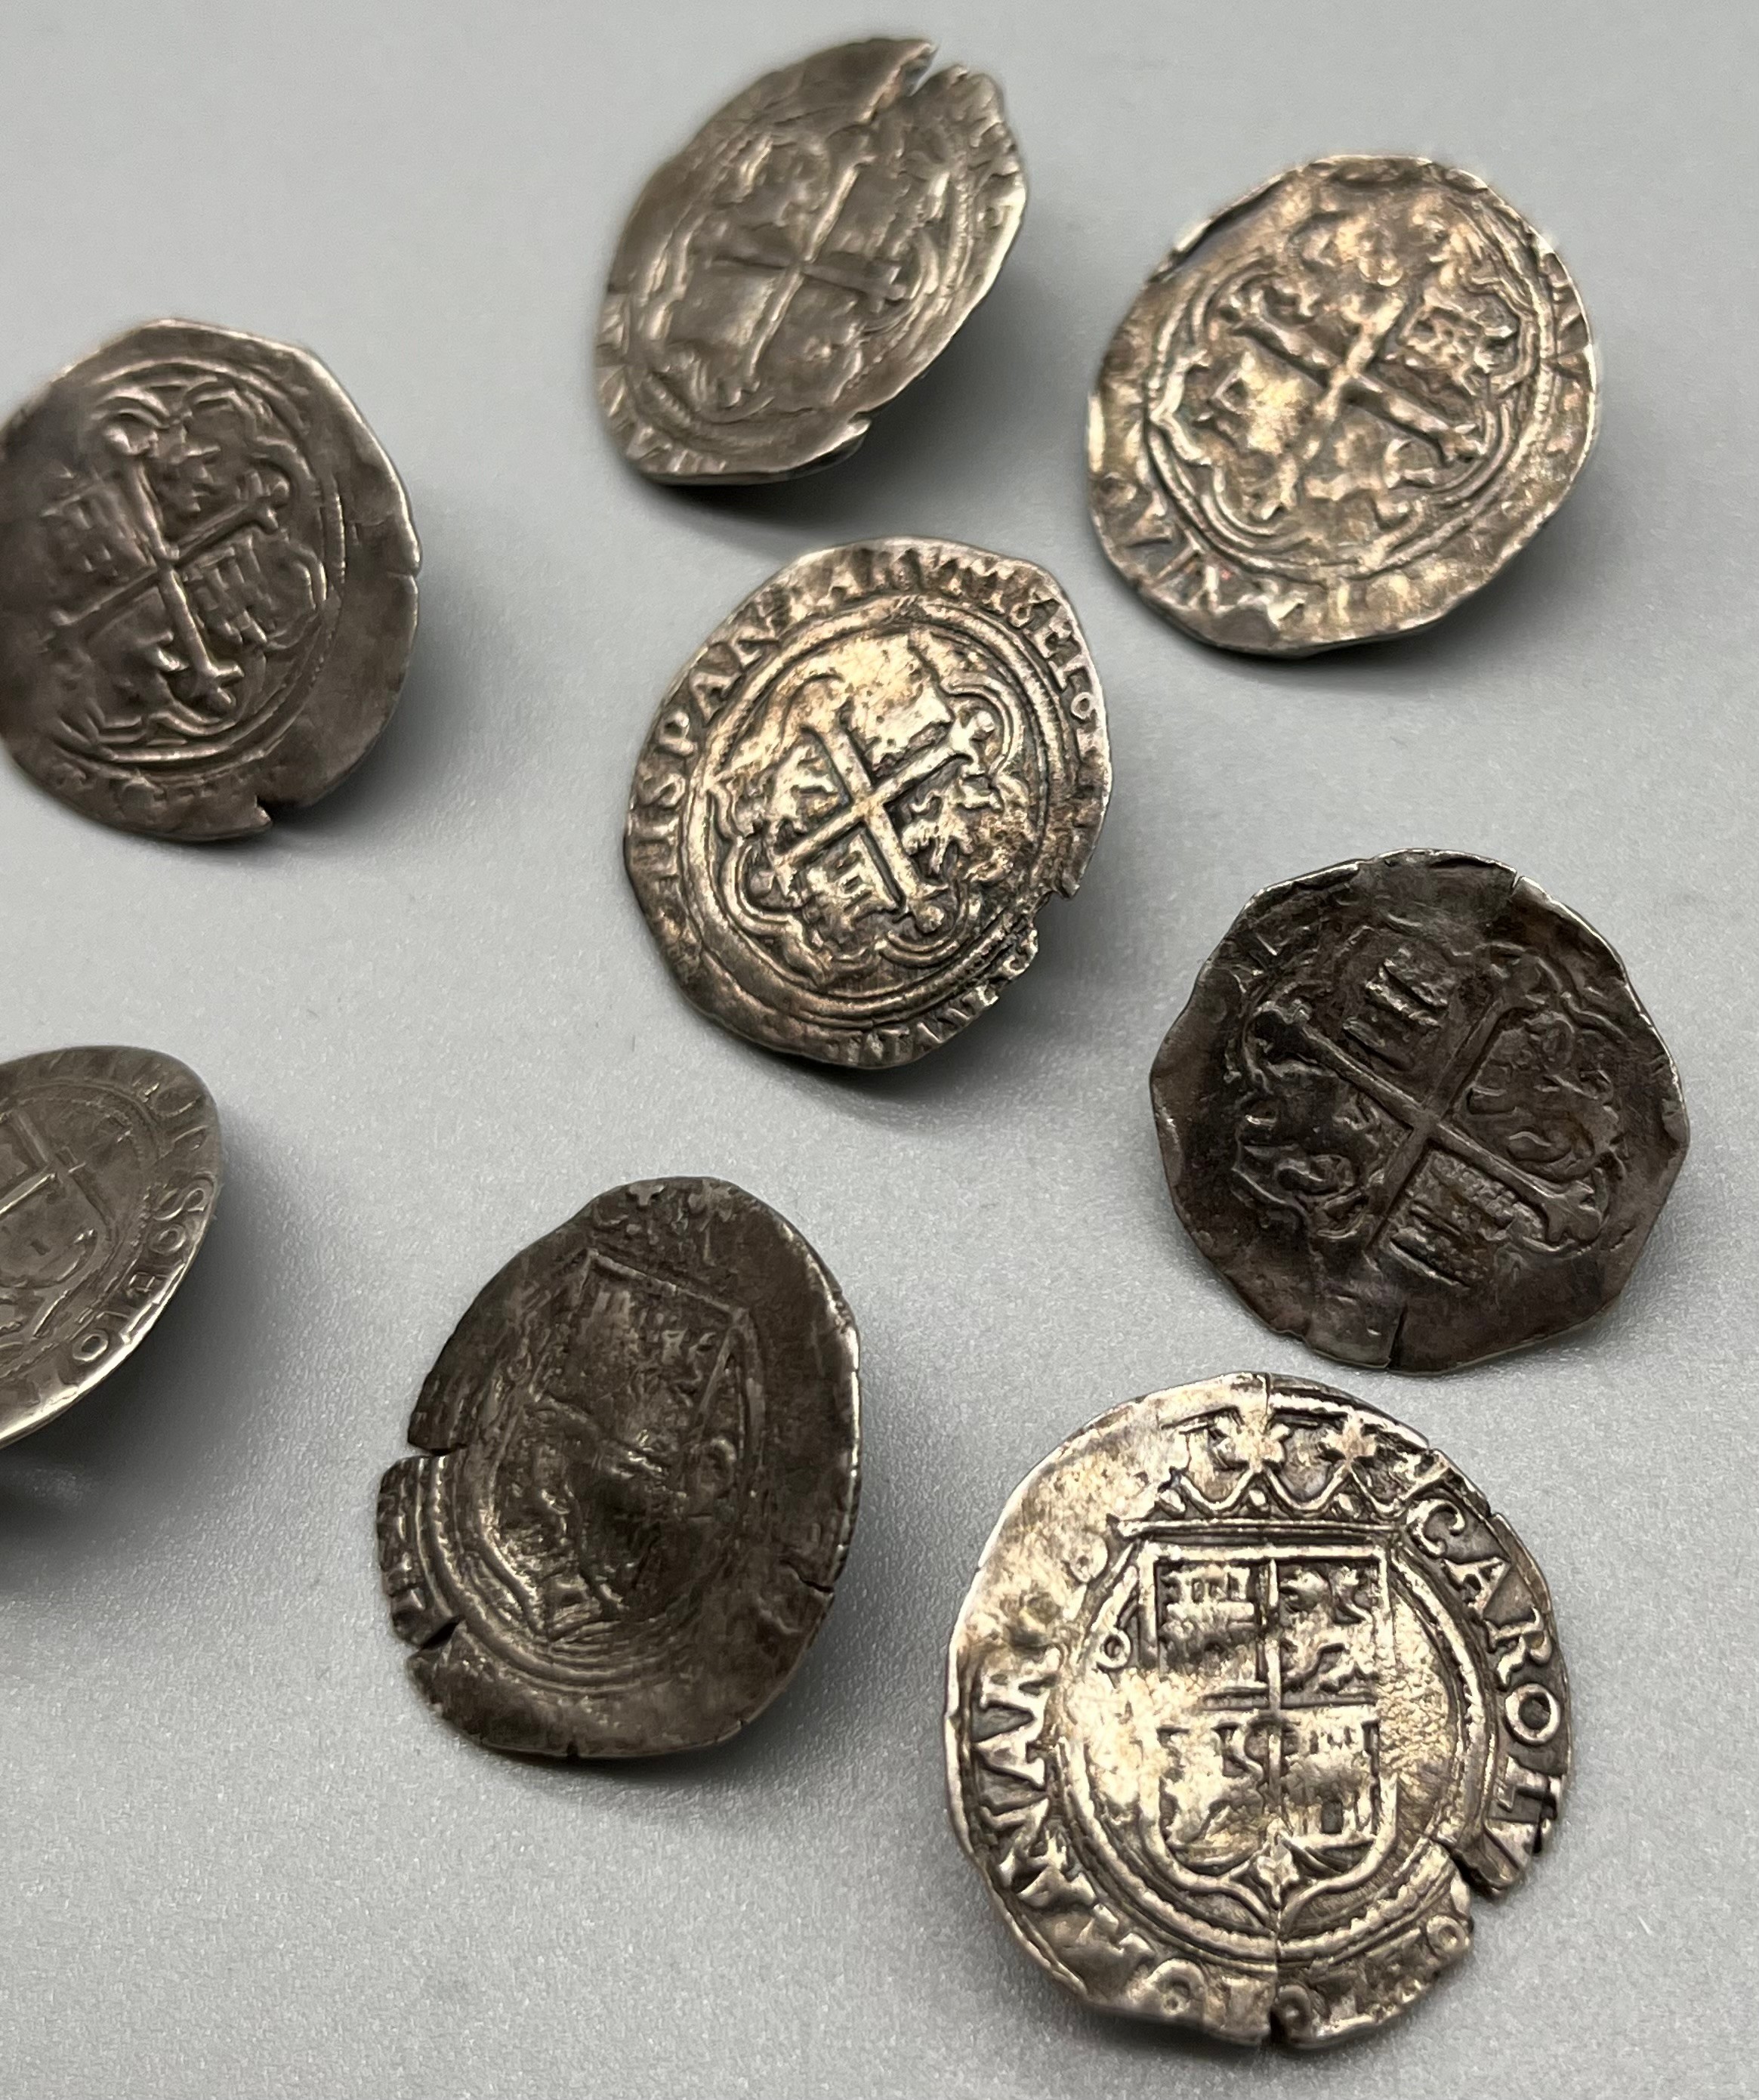 Group of Spanish 16th century Silver Real coins, mounted as buttons - Image 2 of 4